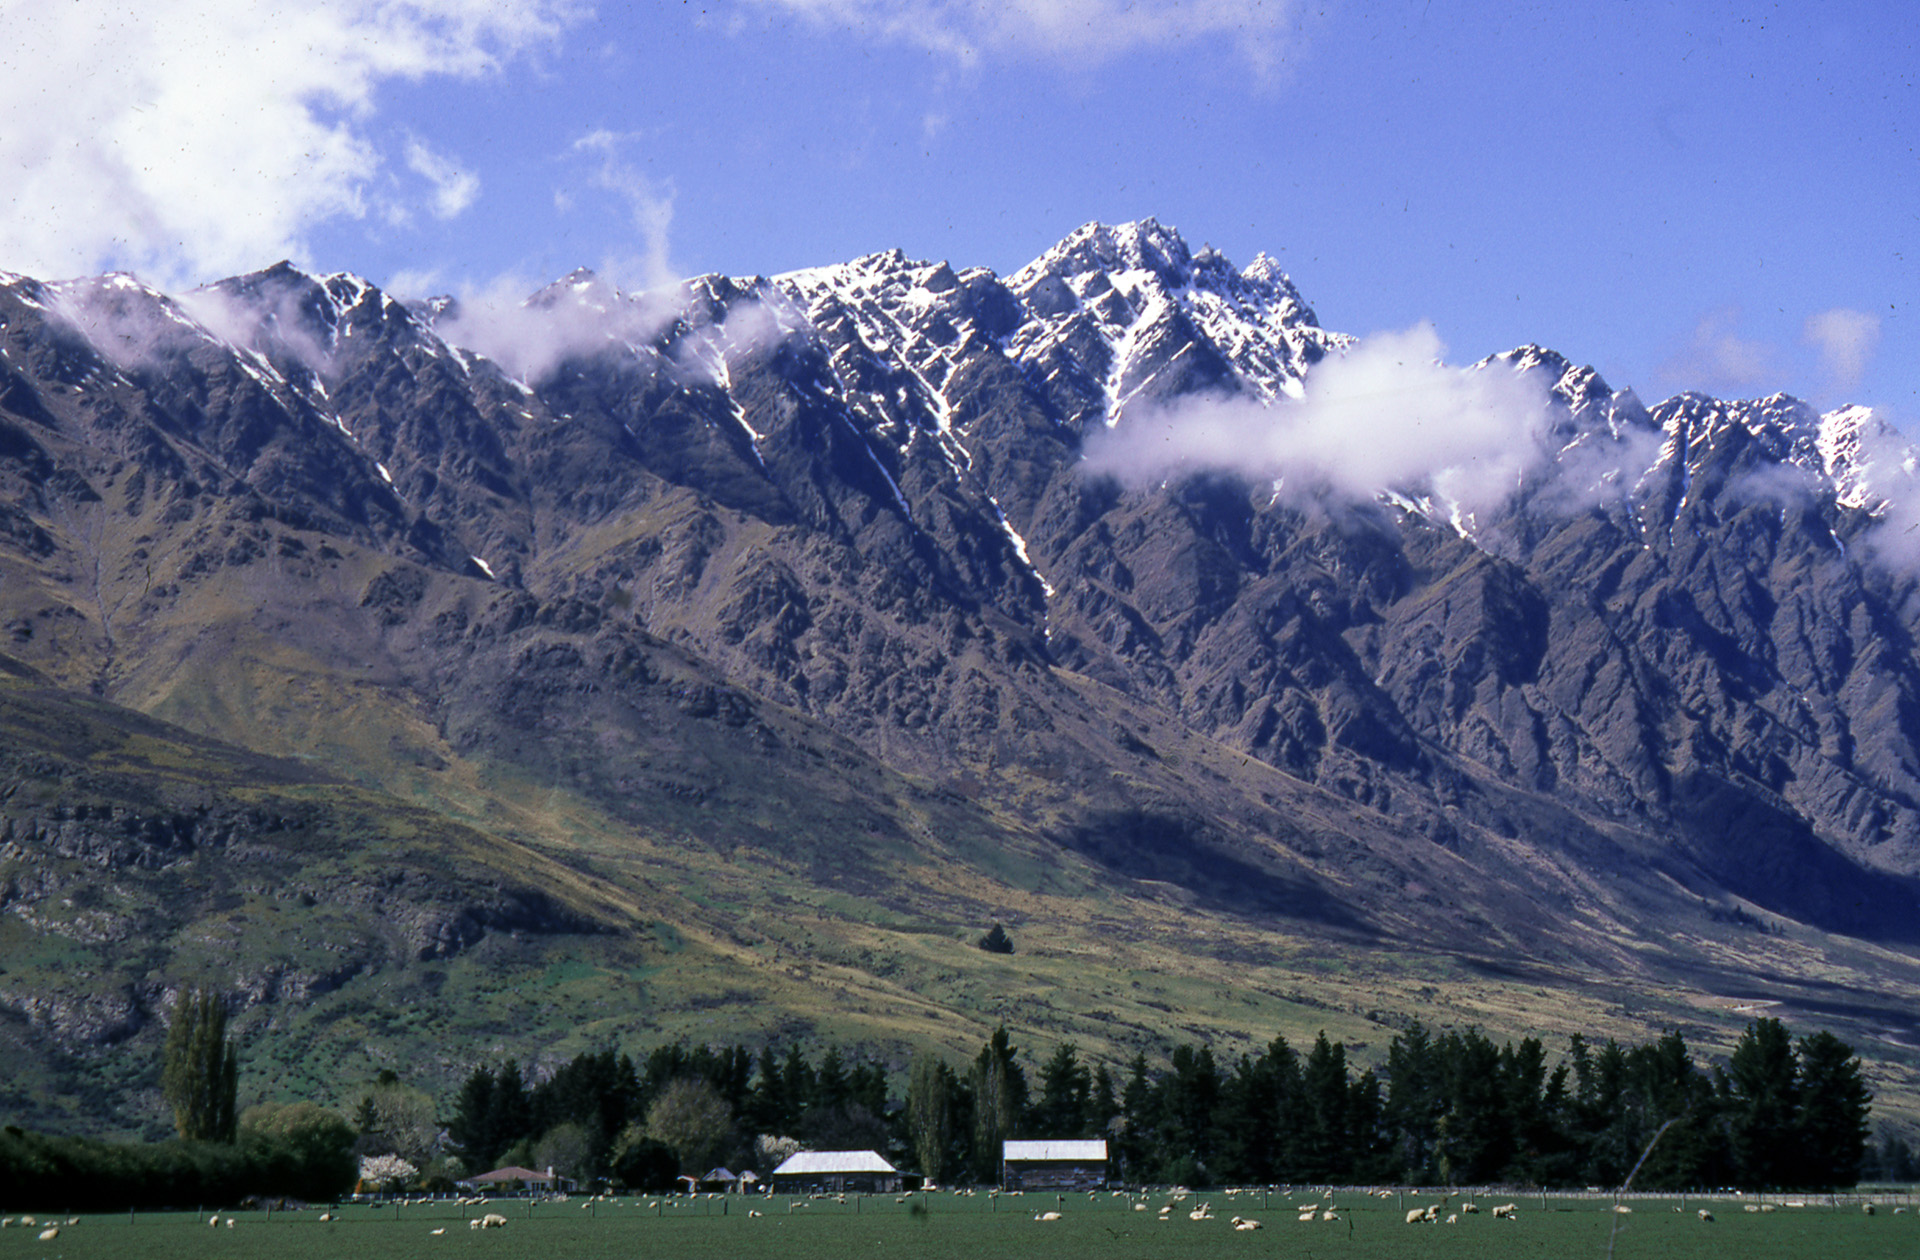 Arranmore Farm at the foot of the Remarkables